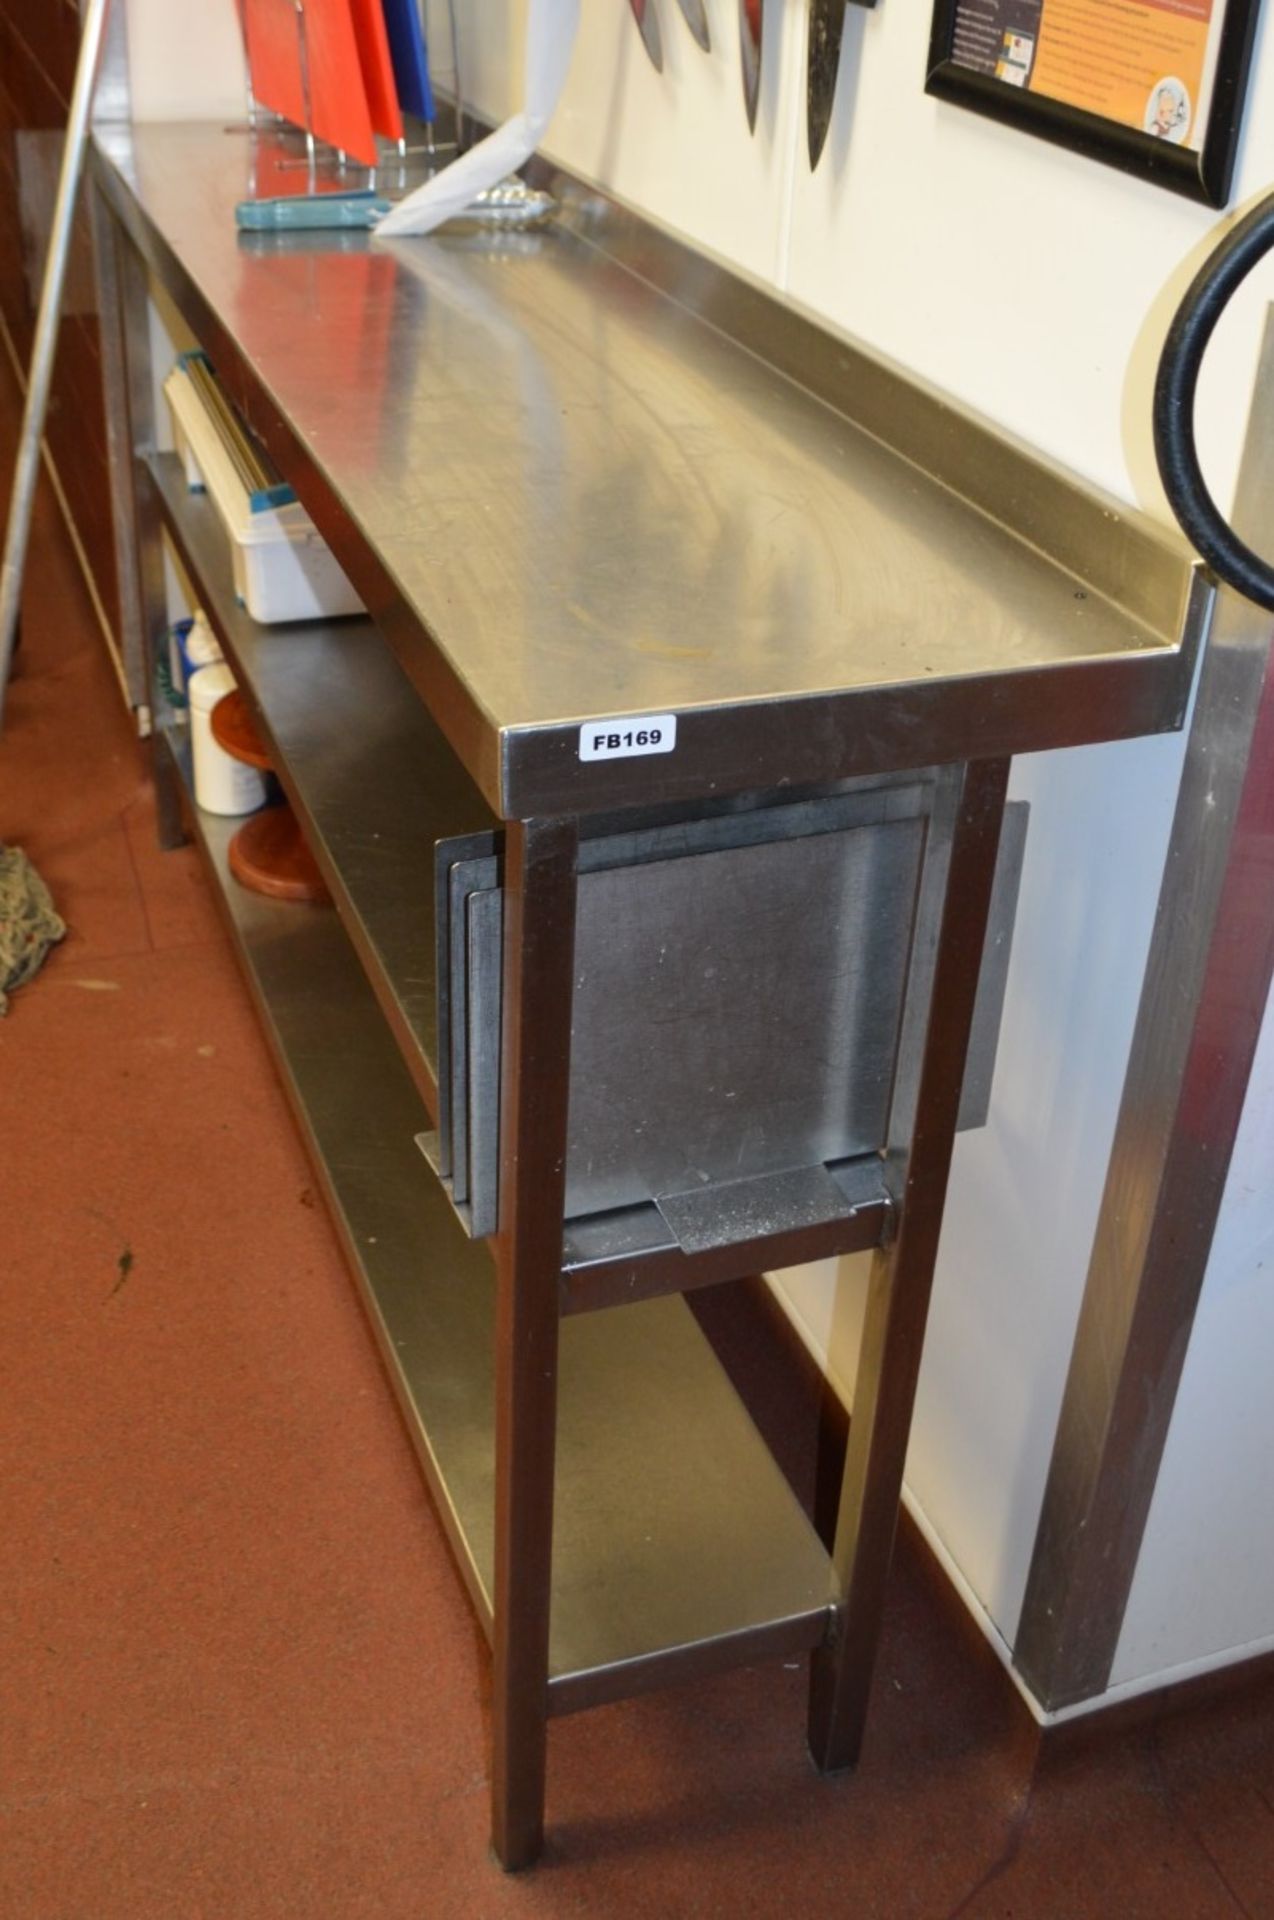 1 x Stainless Steel Prep Bench With Undershelves - H90 x  W170 x D40 cms - Ref FB169 - CL357 - - Image 2 of 2